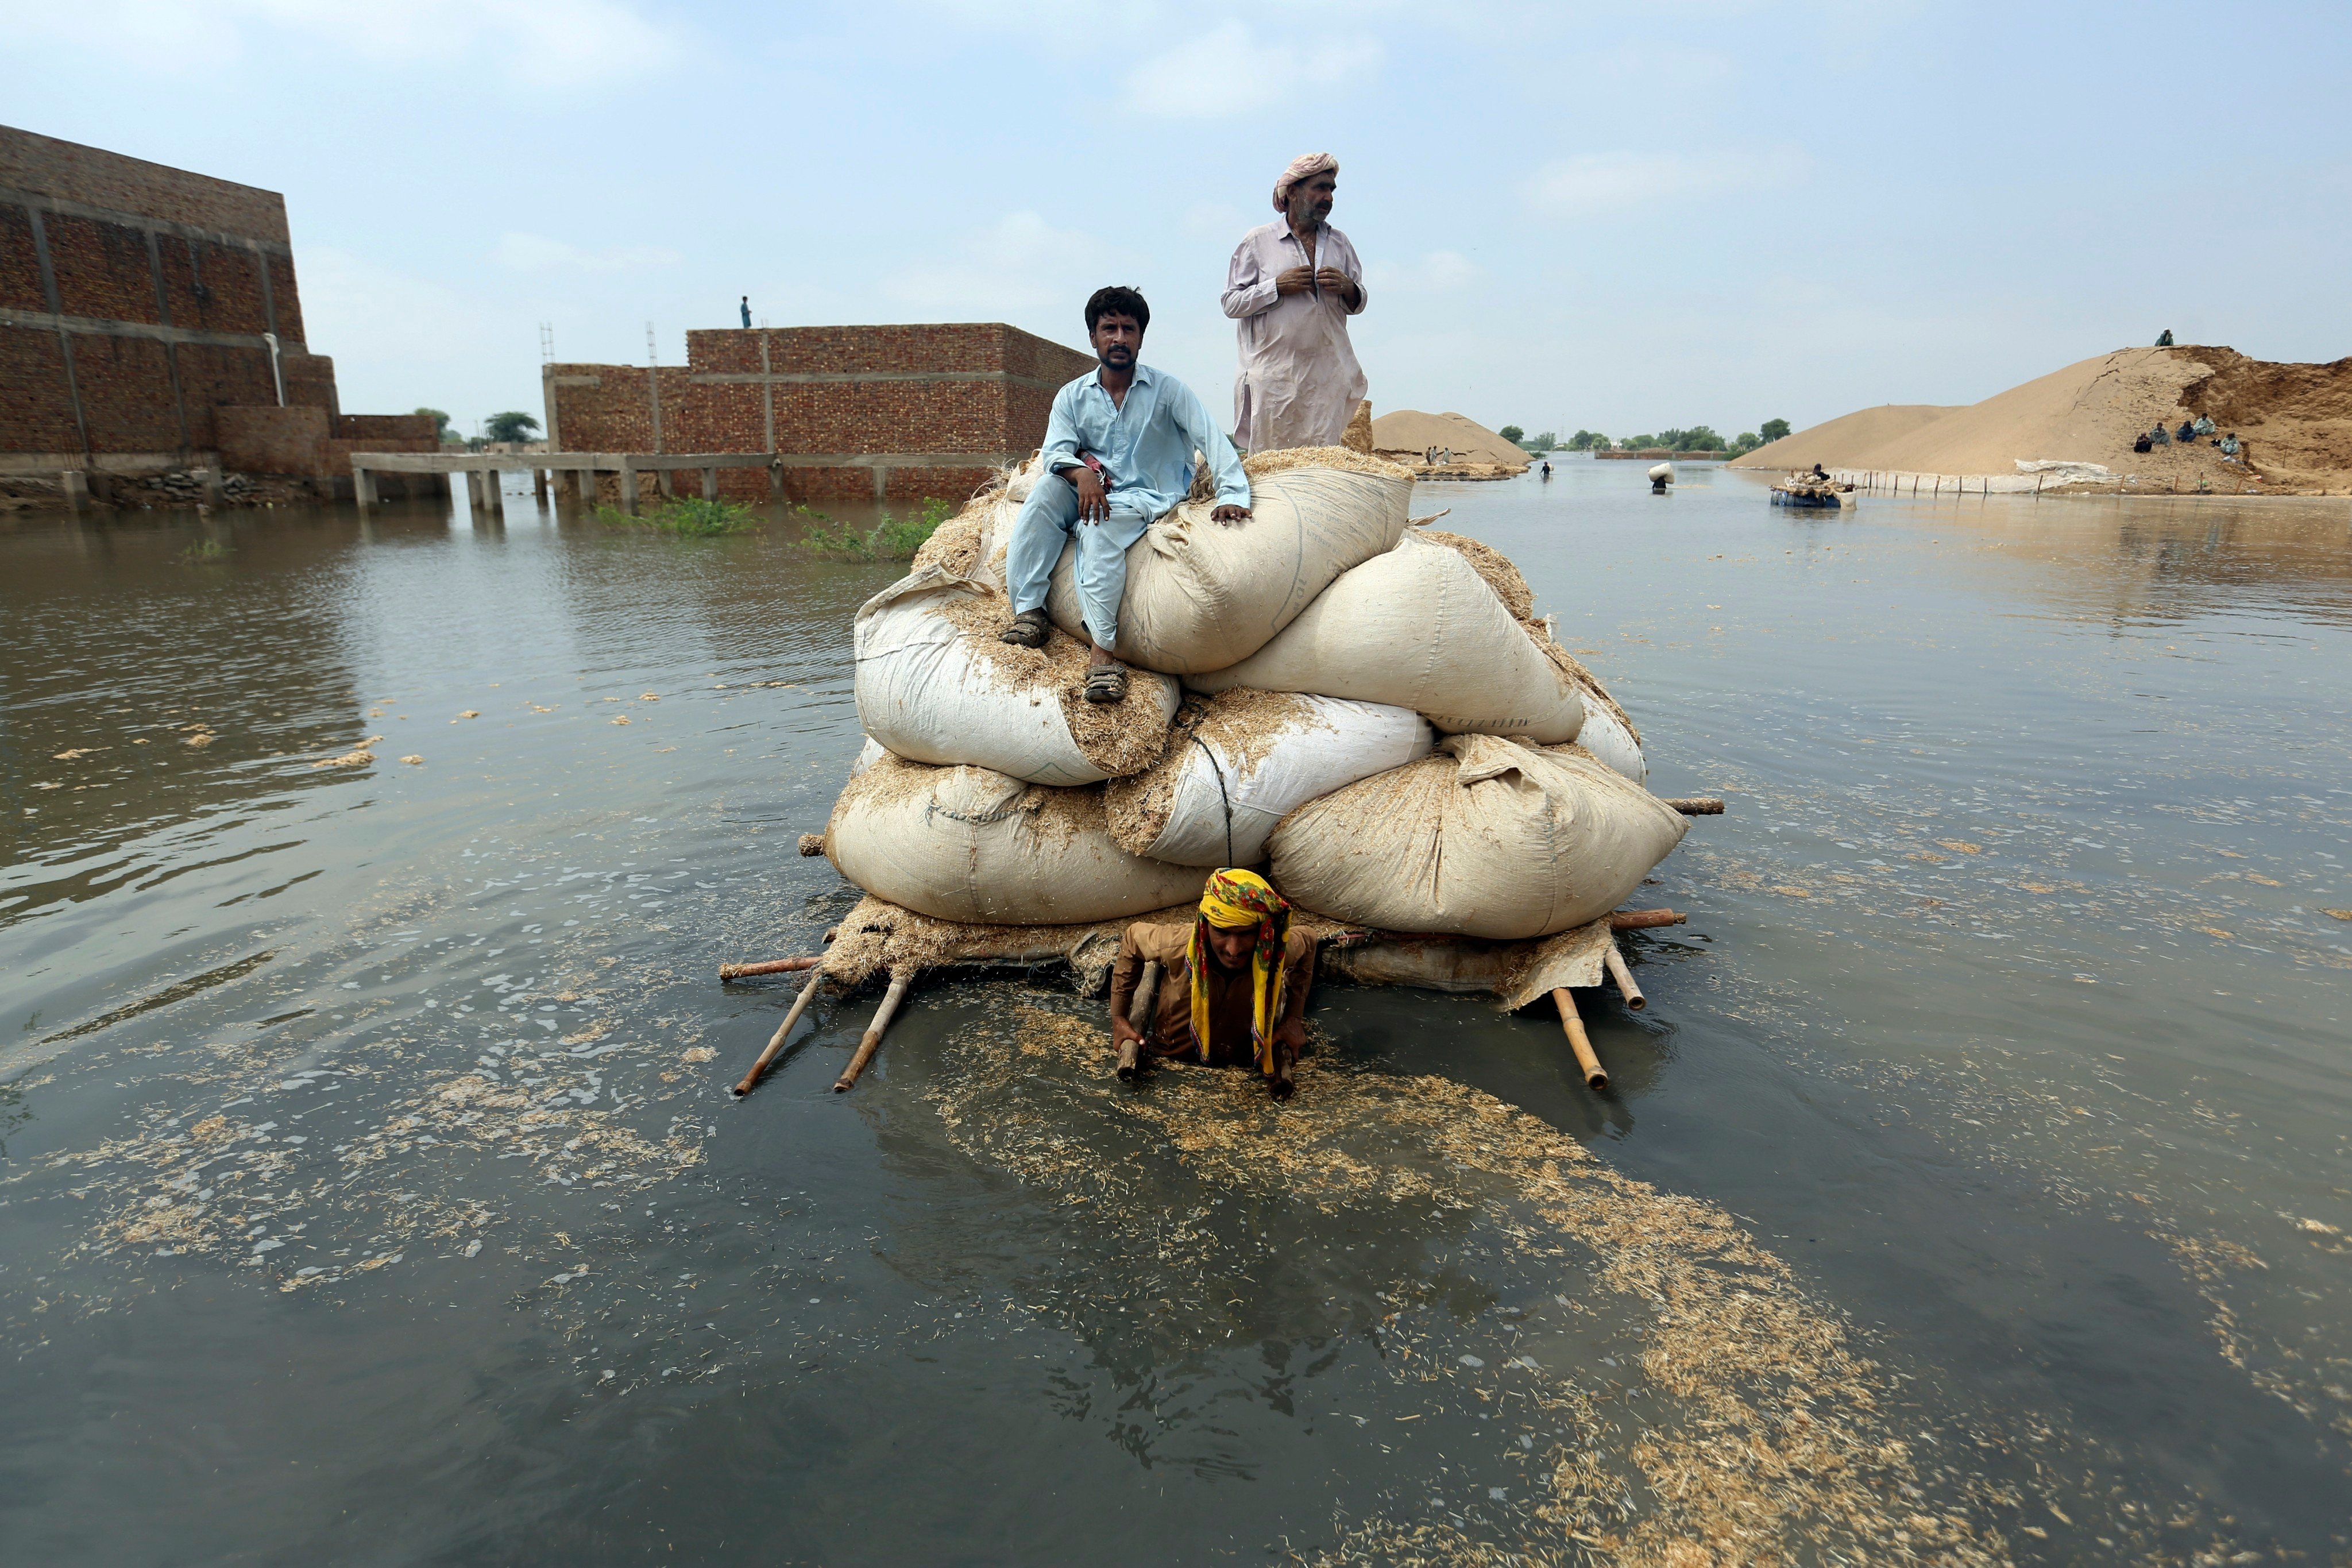 Flood victims from monsoon rain use a makeshift barge to carry hay for cattle, in Jaffarabad, in Pakistan’s southwestern Baluchistan province, on September 5, 2022. The flooding is just a preview of the climate consequences that are now impossible to avoid. Photo: AP